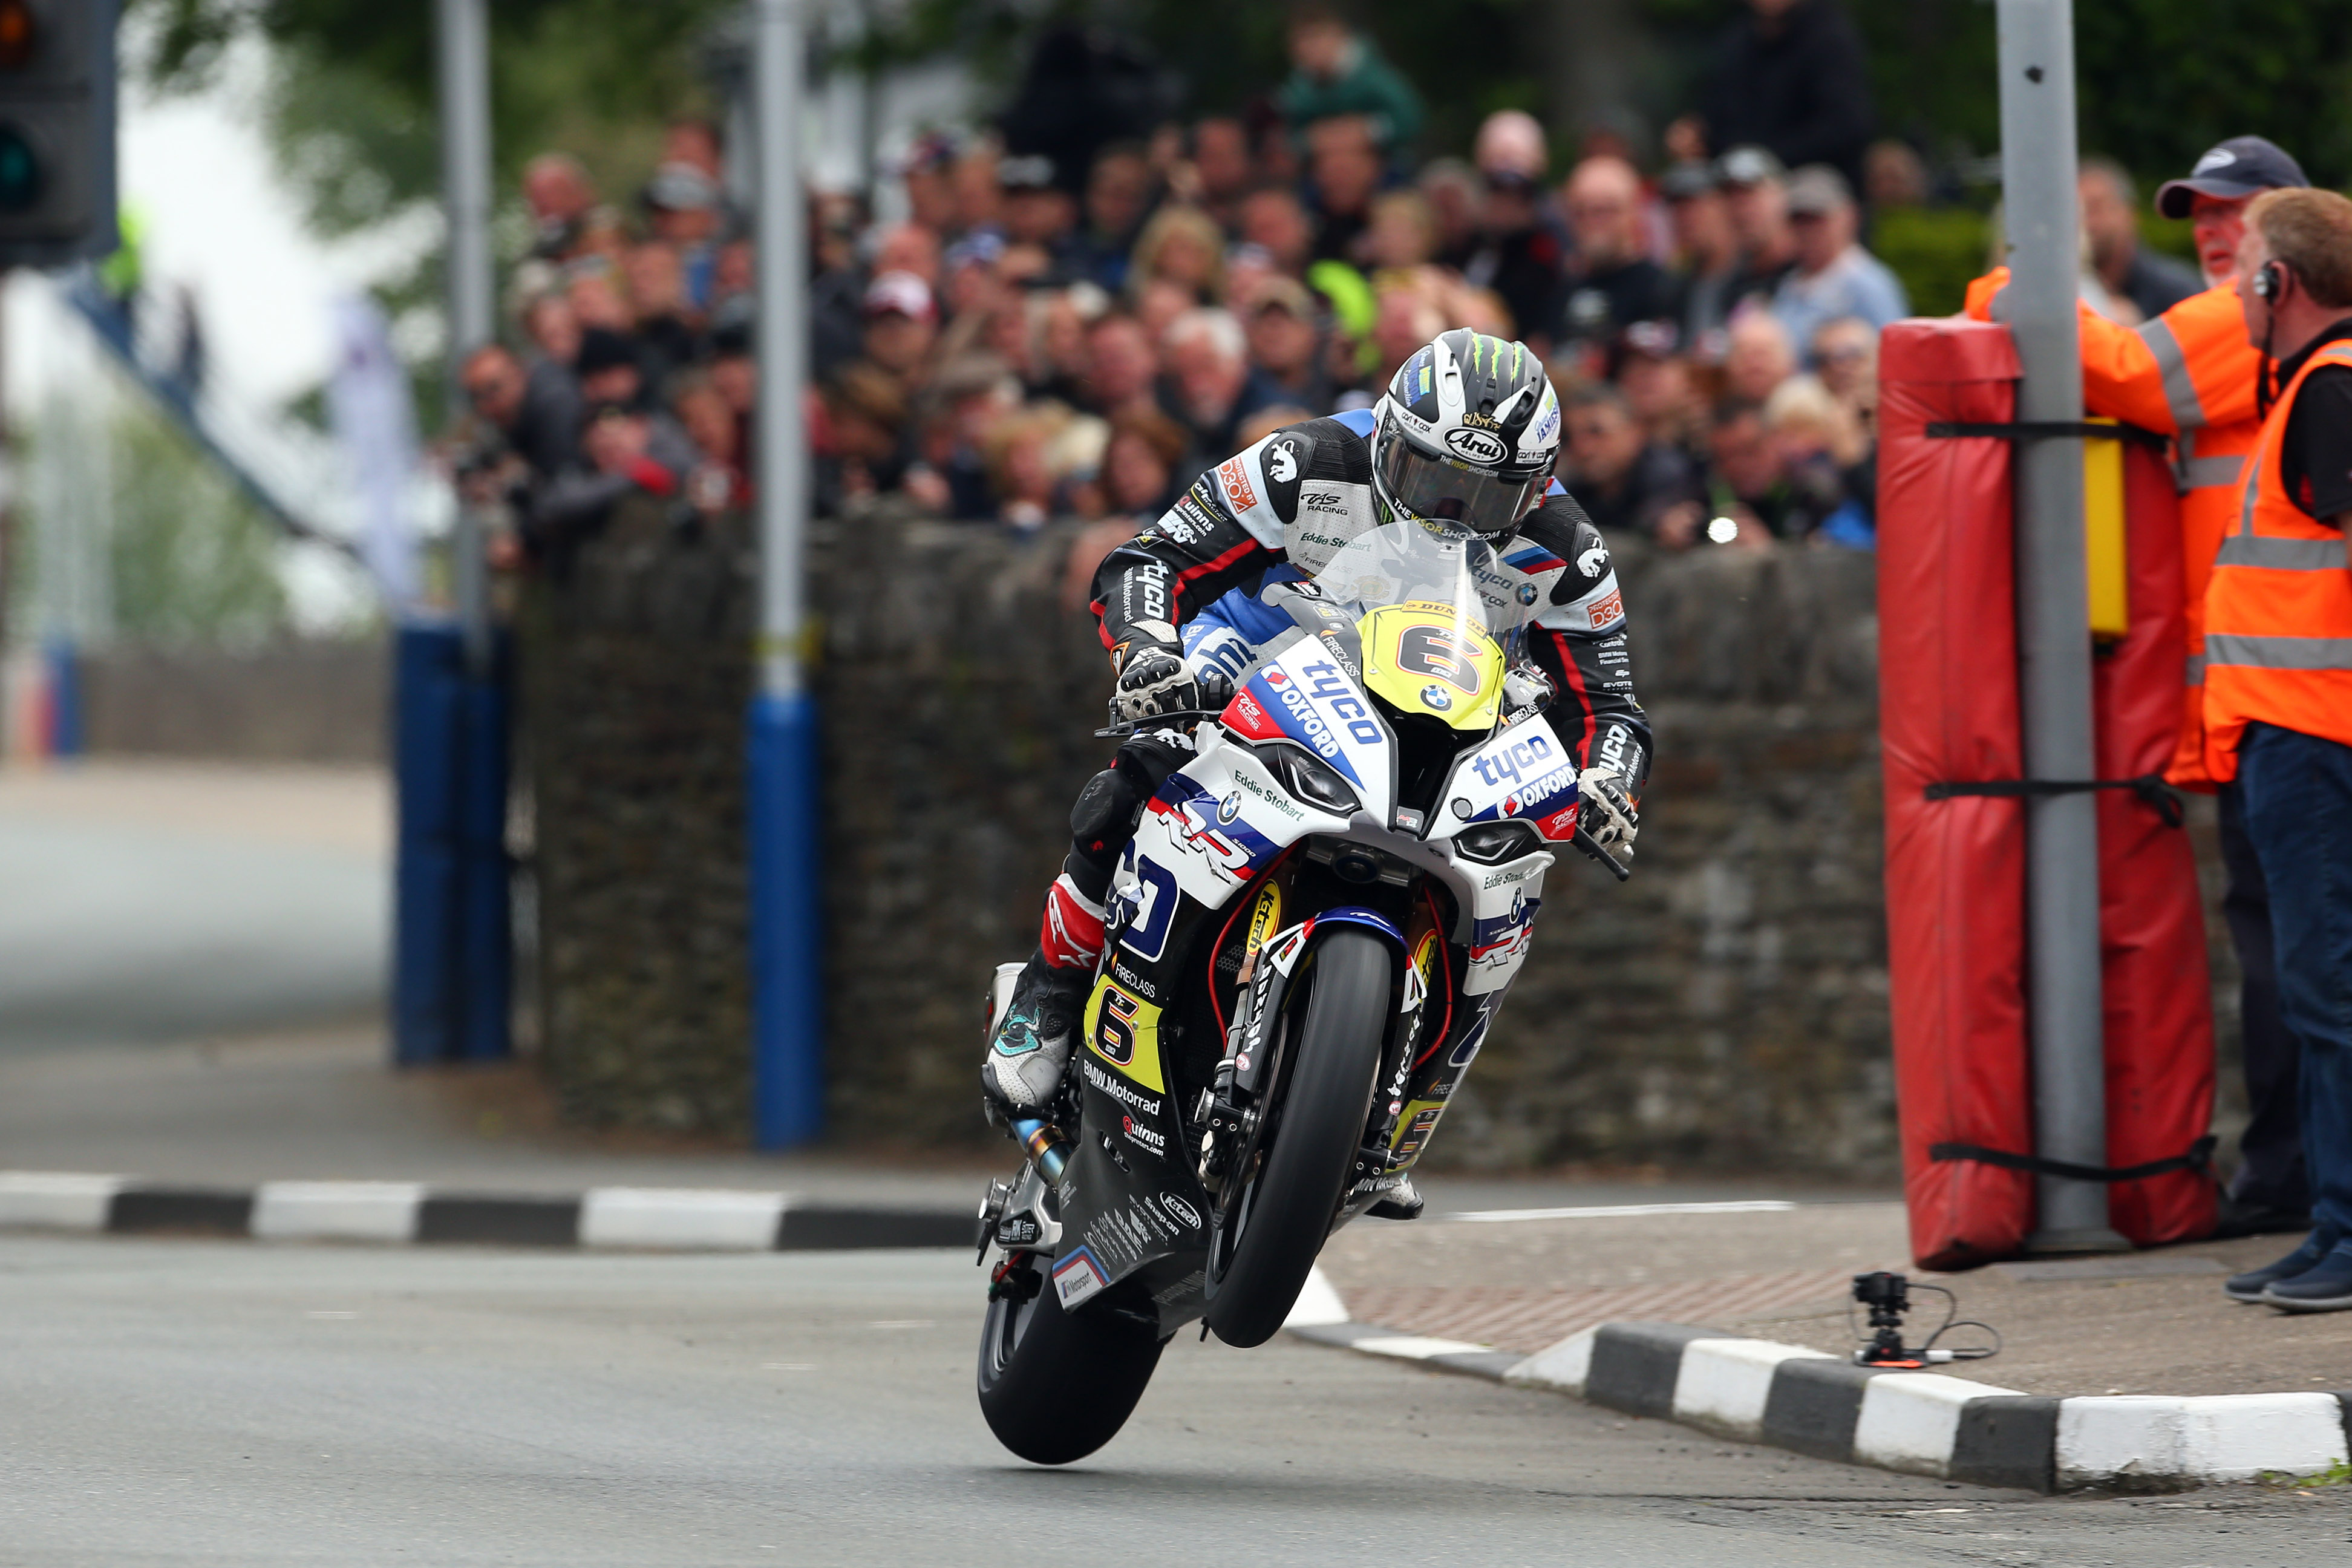 Isle of Man TT race cancelled due to Covid-19 fears 2019 Isle of Man TT